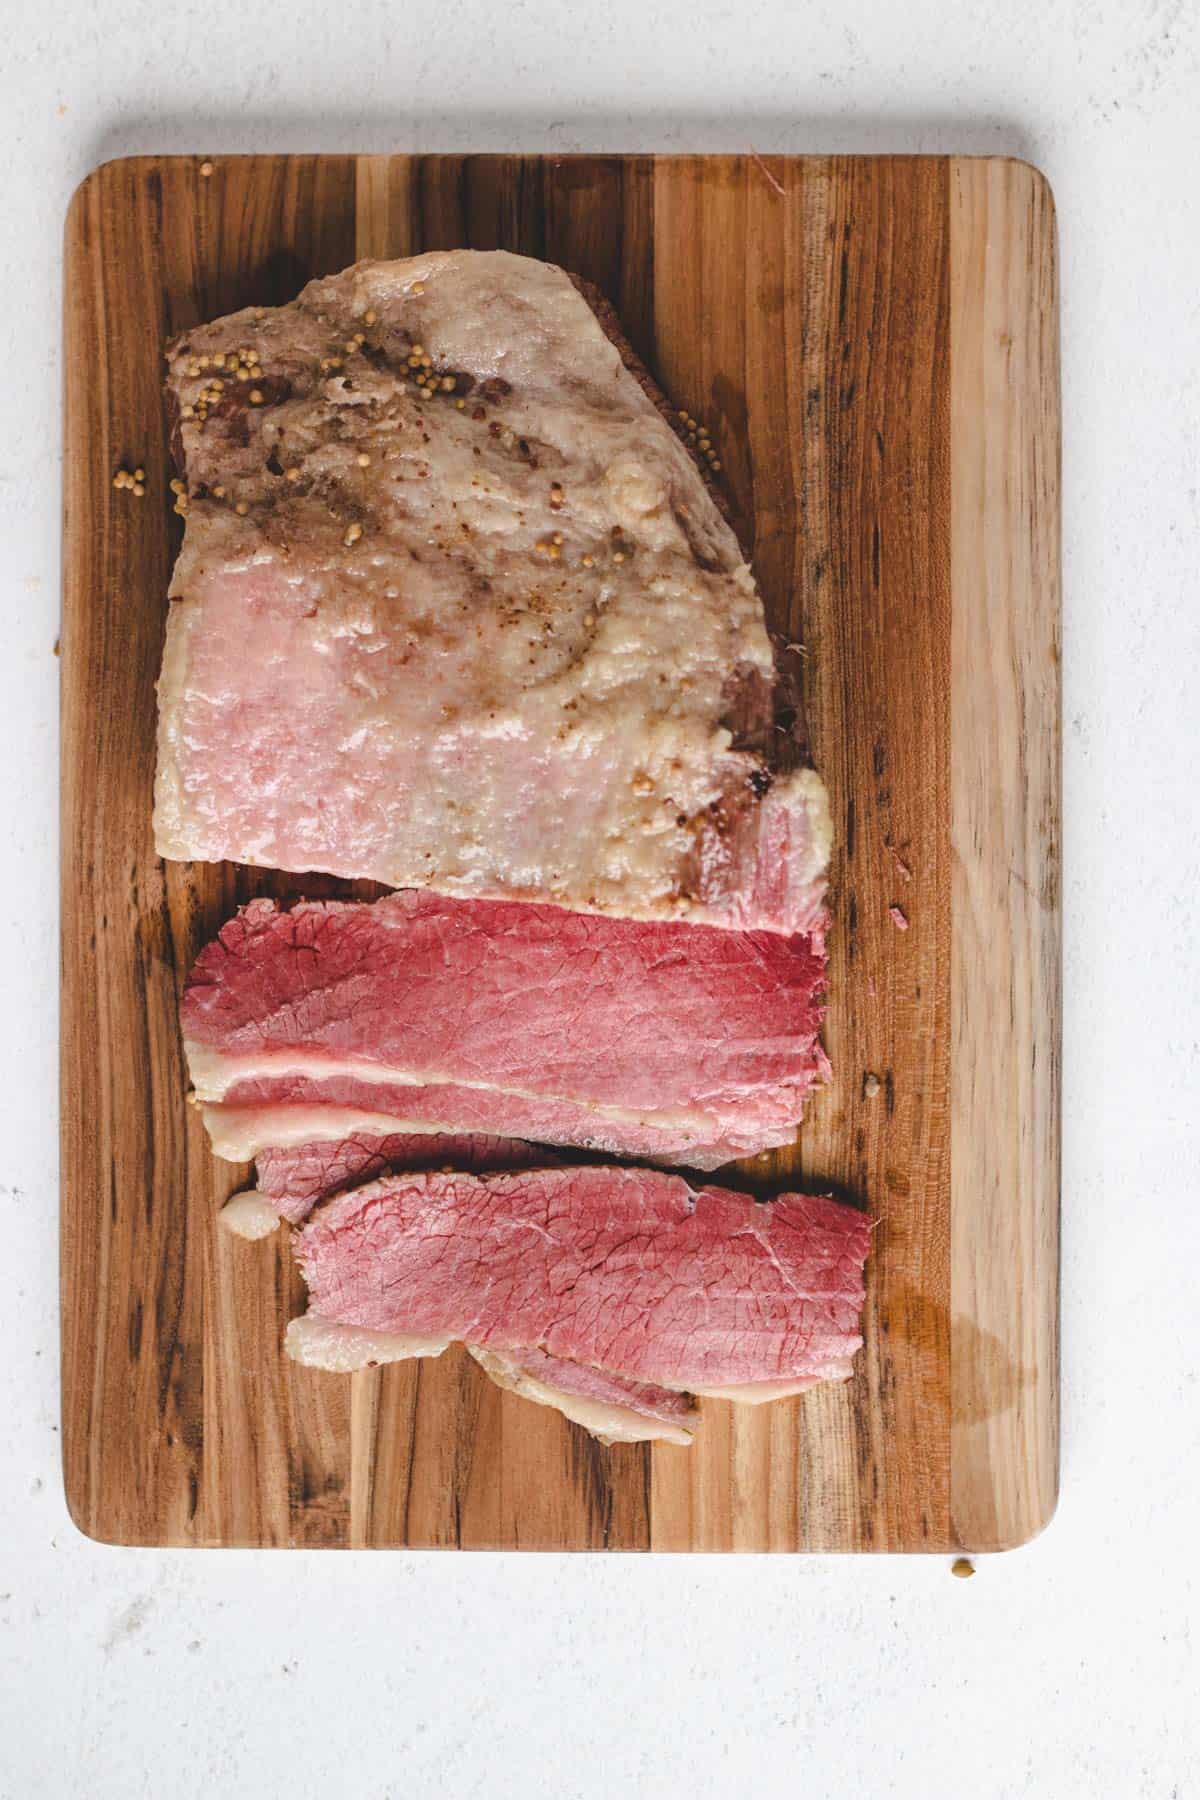 A photo of sliced corned beef arranged on a wooden cutting board.